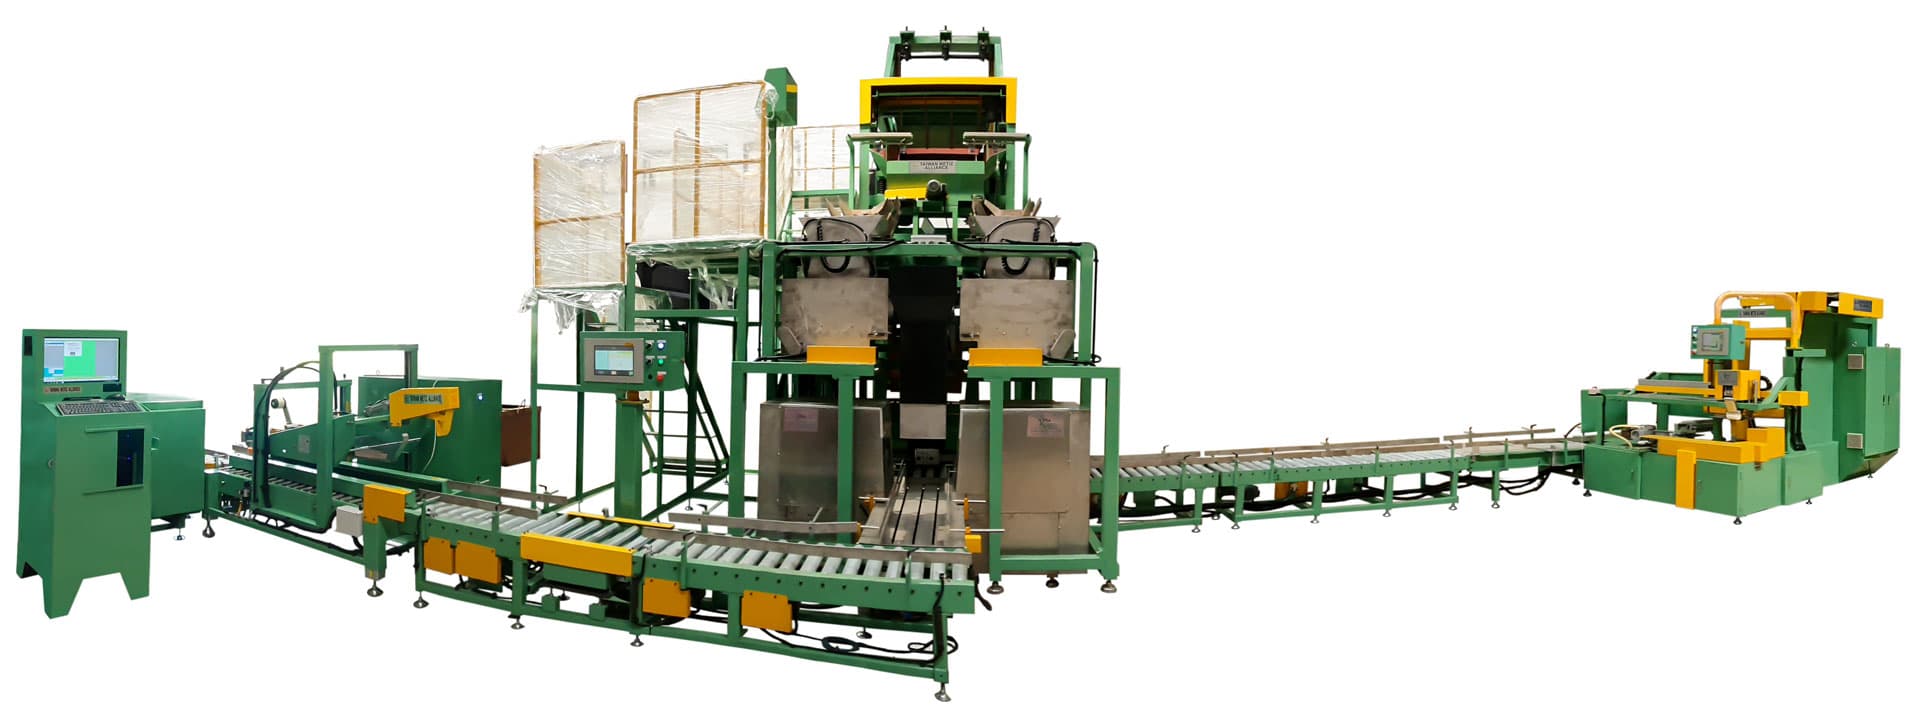 Automatic carton electromagnetic orientation packing line for bolts and nuts